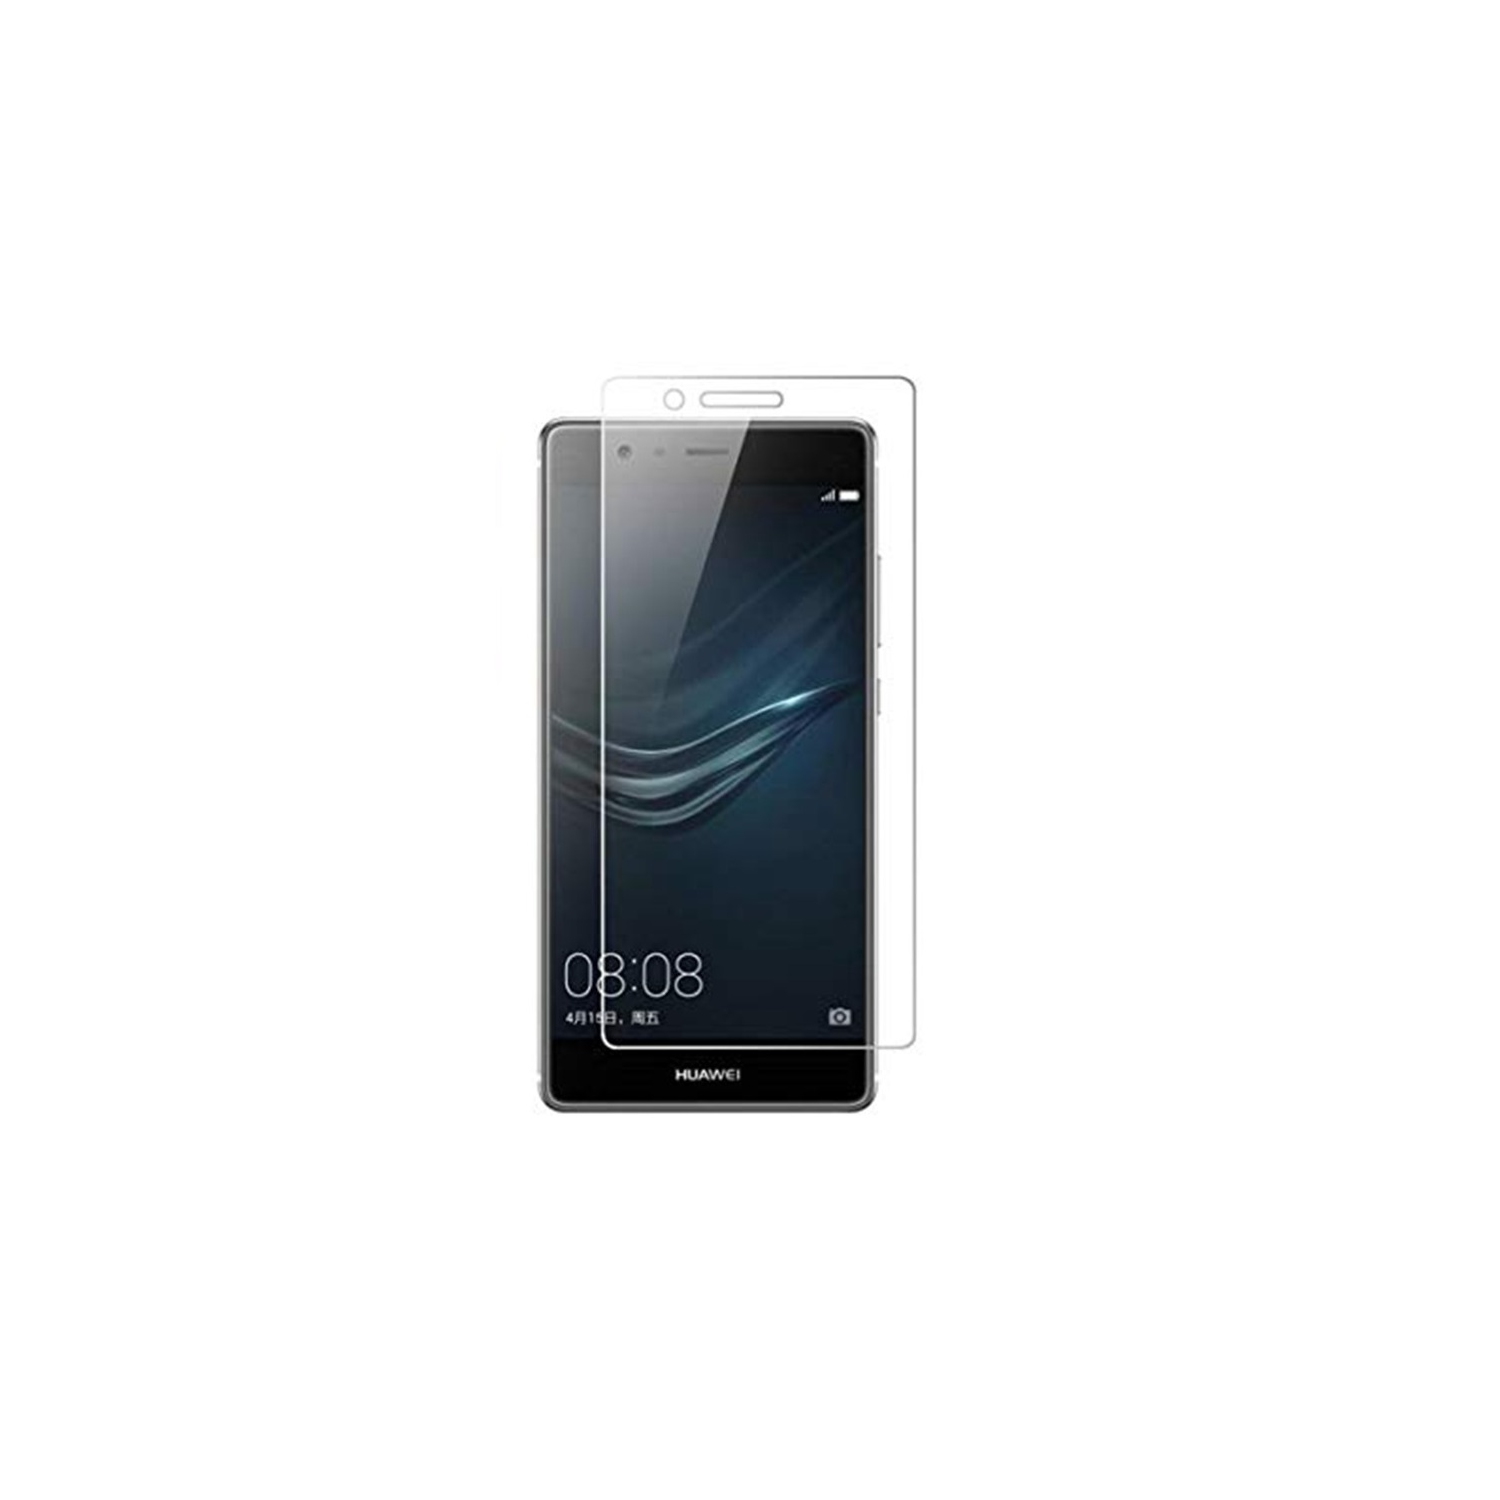 【2 Packs】 CSmart Premium Tempered Glass Screen Protector for Huawei P8 Lite, Case Friendly & Bubble Free